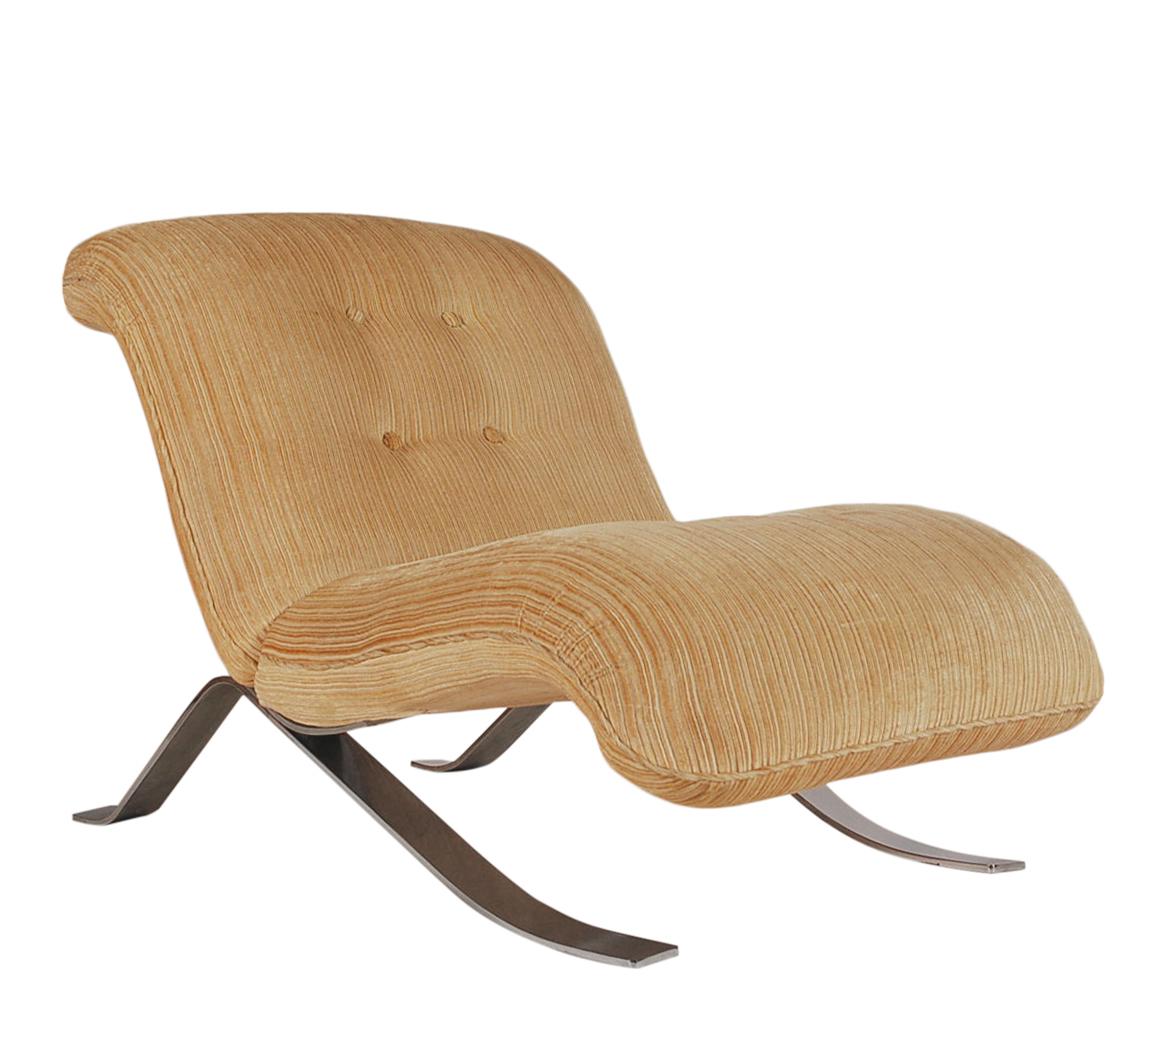 Late 20th Century Mid-Century Modern Pair of Slipper Lounge Chairs with Barcelona Style Legs